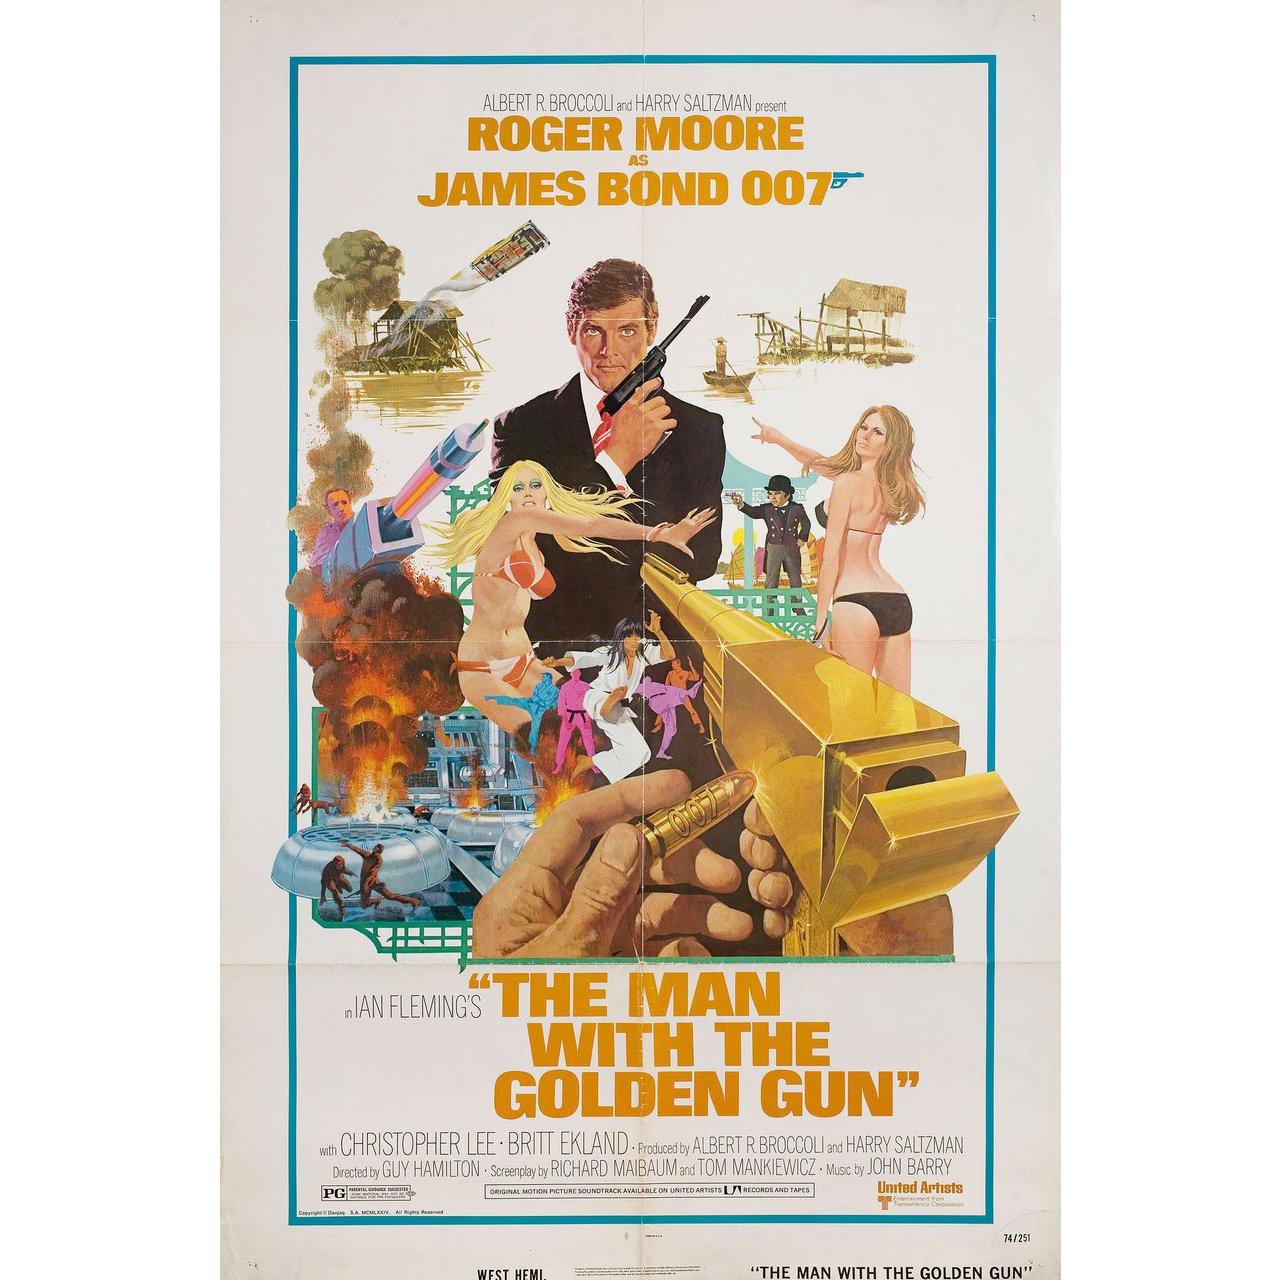 Original 1974 U.S. one sheet poster by Robert McGinnis for the film “The Man with the Golden Gun” directed by Guy Hamilton with Roger Moore / Christopher Lee / Britt Ekland / Maud Adams. Very Good-Fine condition, folded. Many original posters were